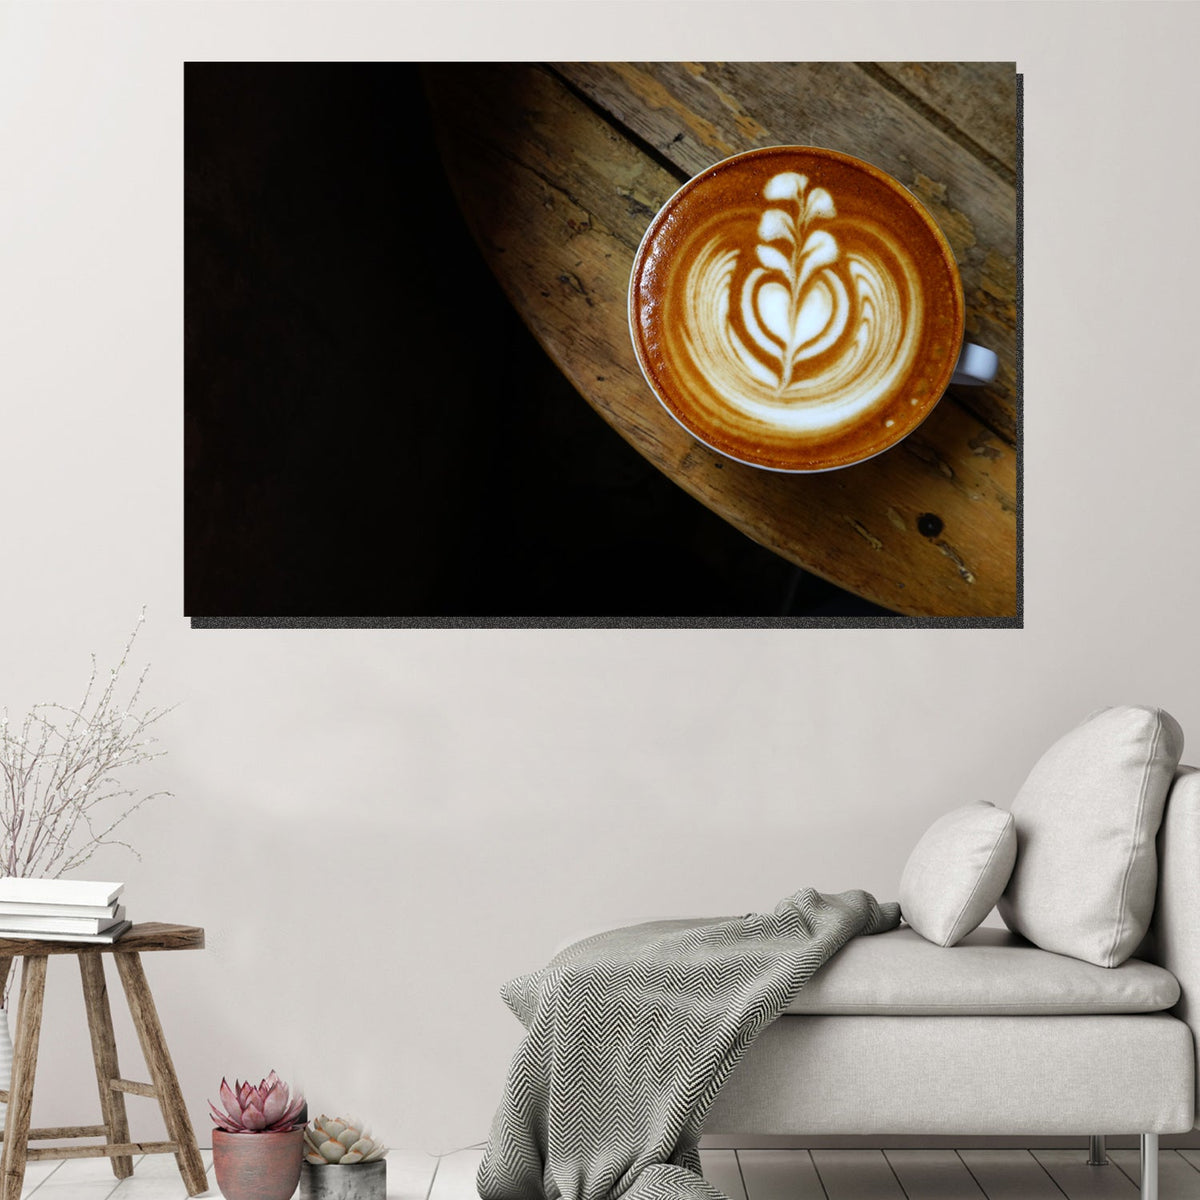 https://cdn.shopify.com/s/files/1/0387/9986/8044/products/CoffeeBreakCanvasArtprintStretched-3.jpg